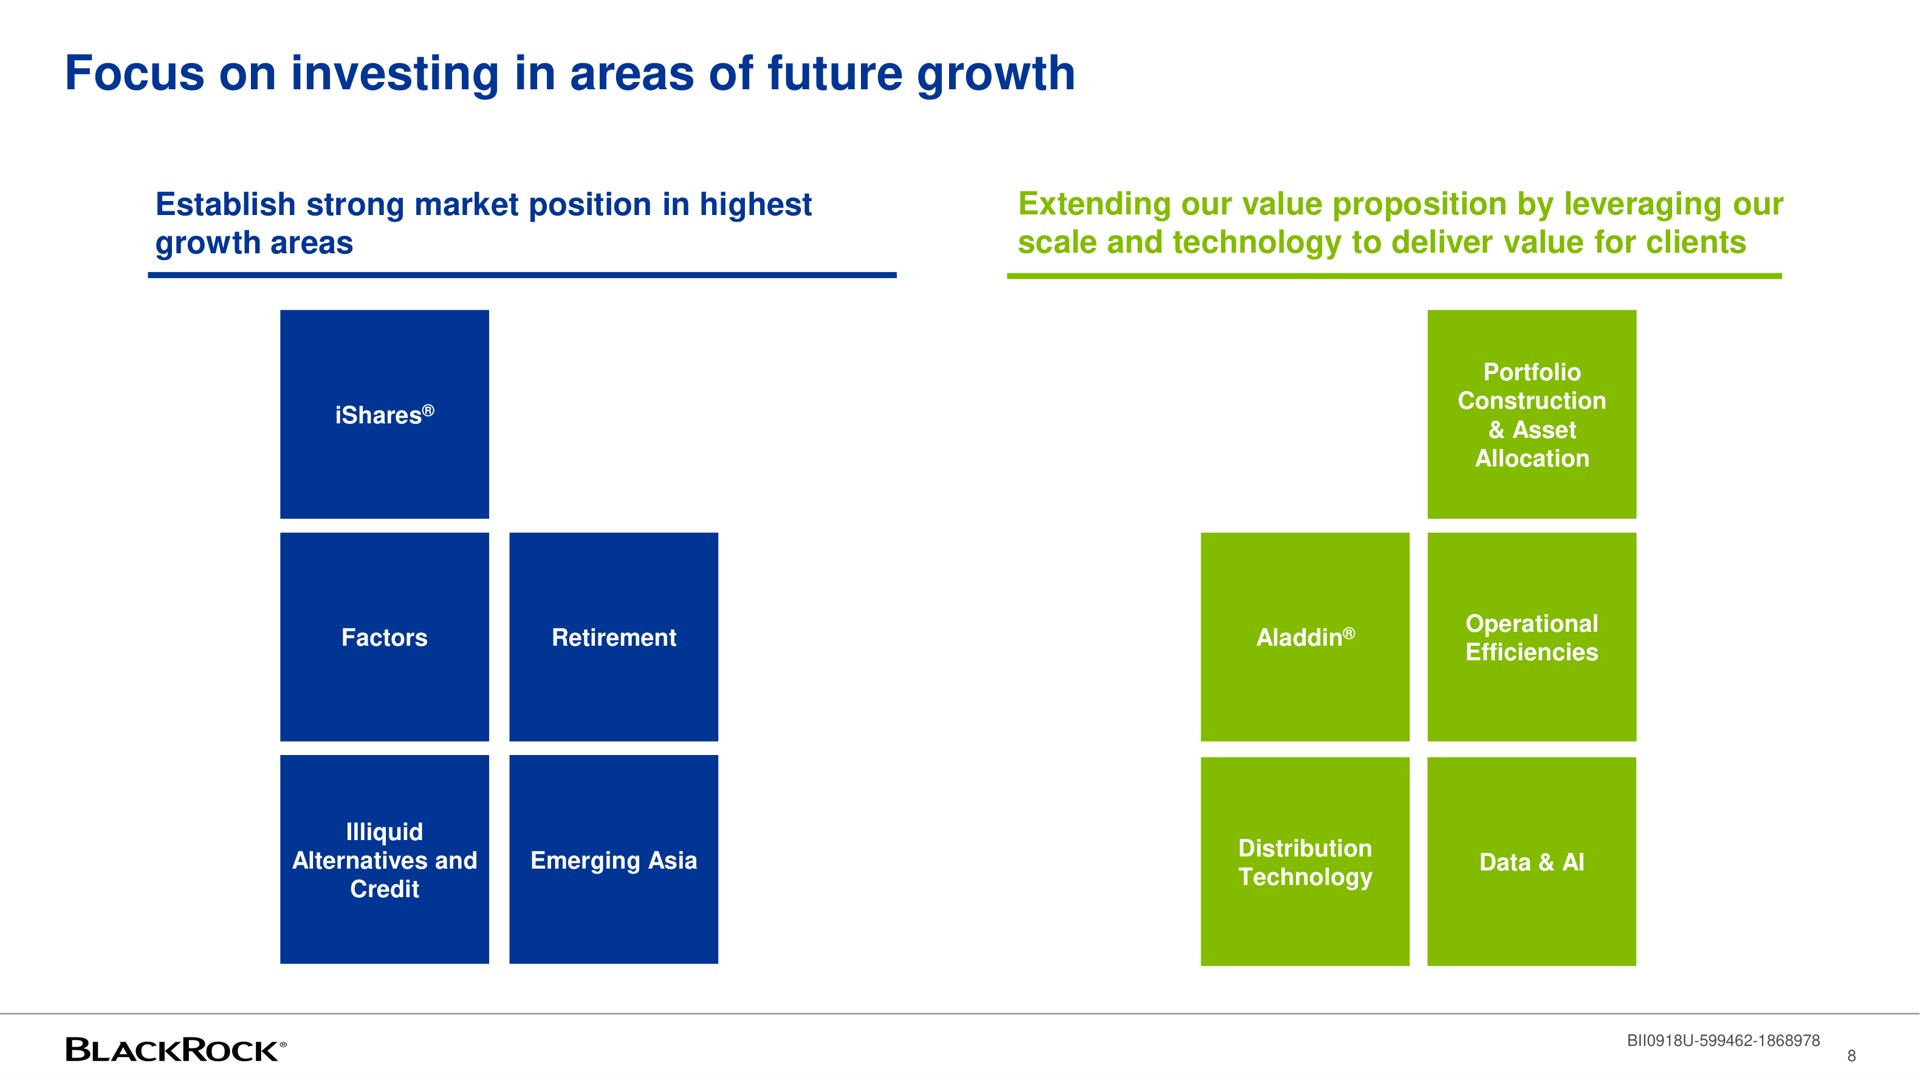 focus on investing in areas of future growth | BlackRock